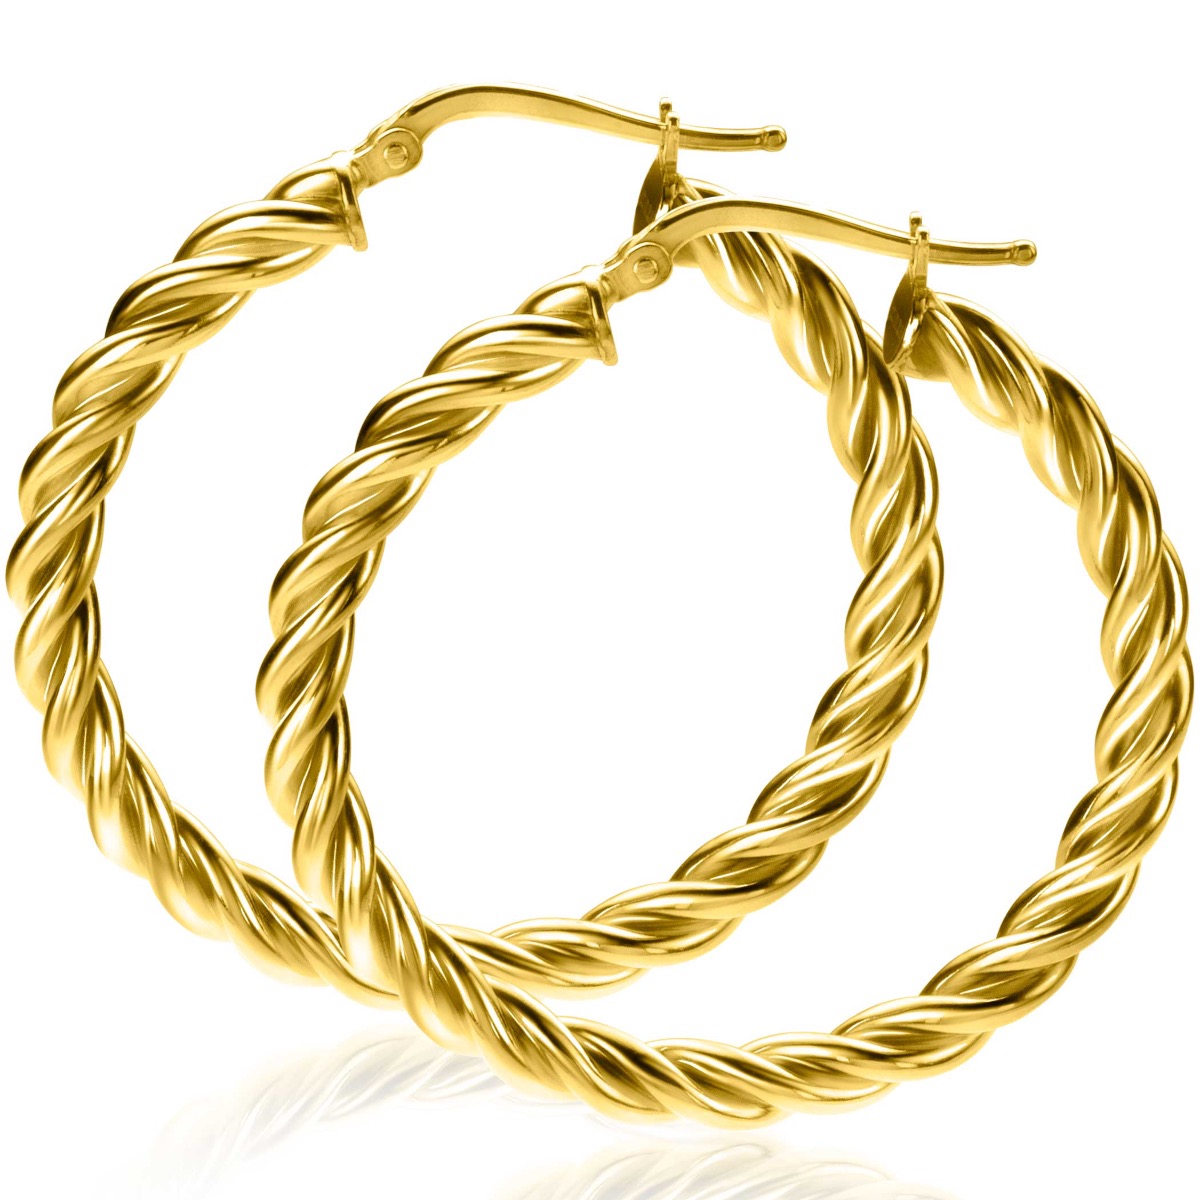 37mm ZINZI Gold Plated Sterling Silver Hoop Earrings with Twisted Tube width 4mm ZIO2282G